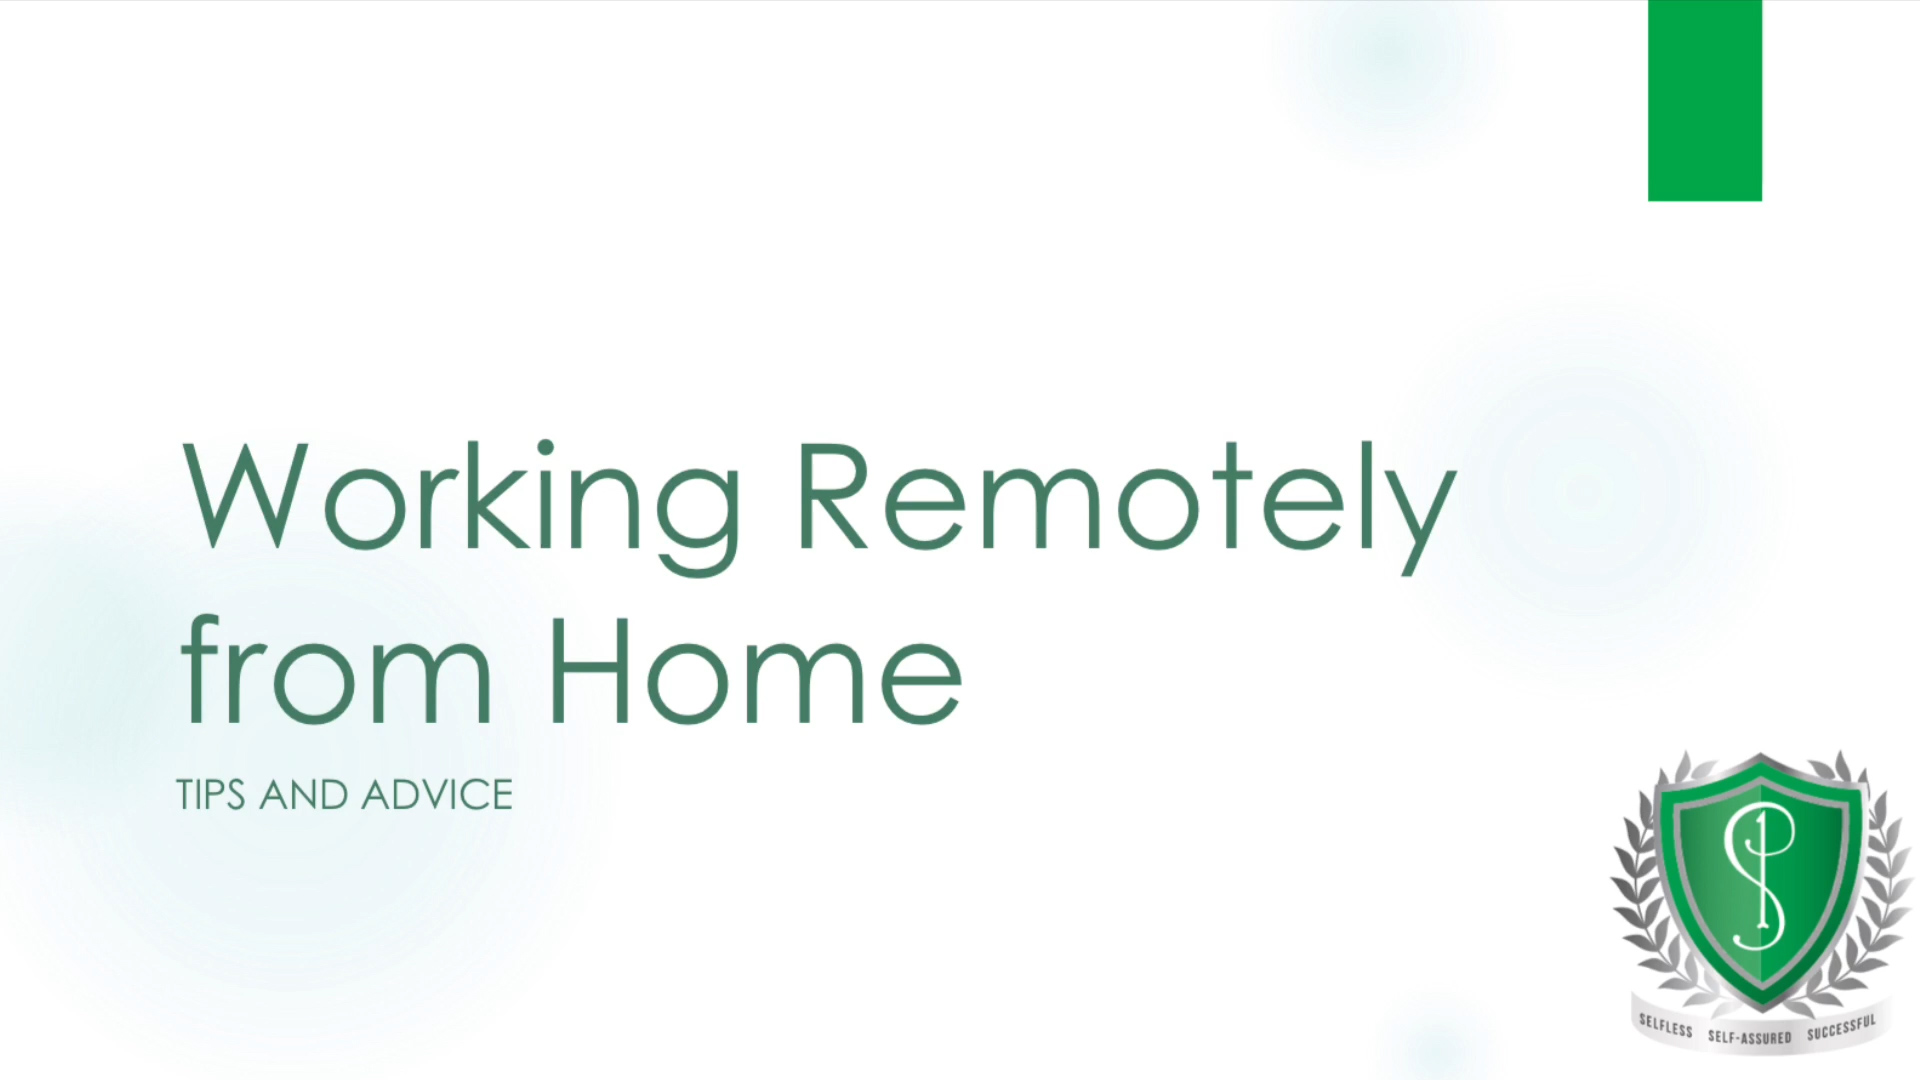 working remotely from home meaning